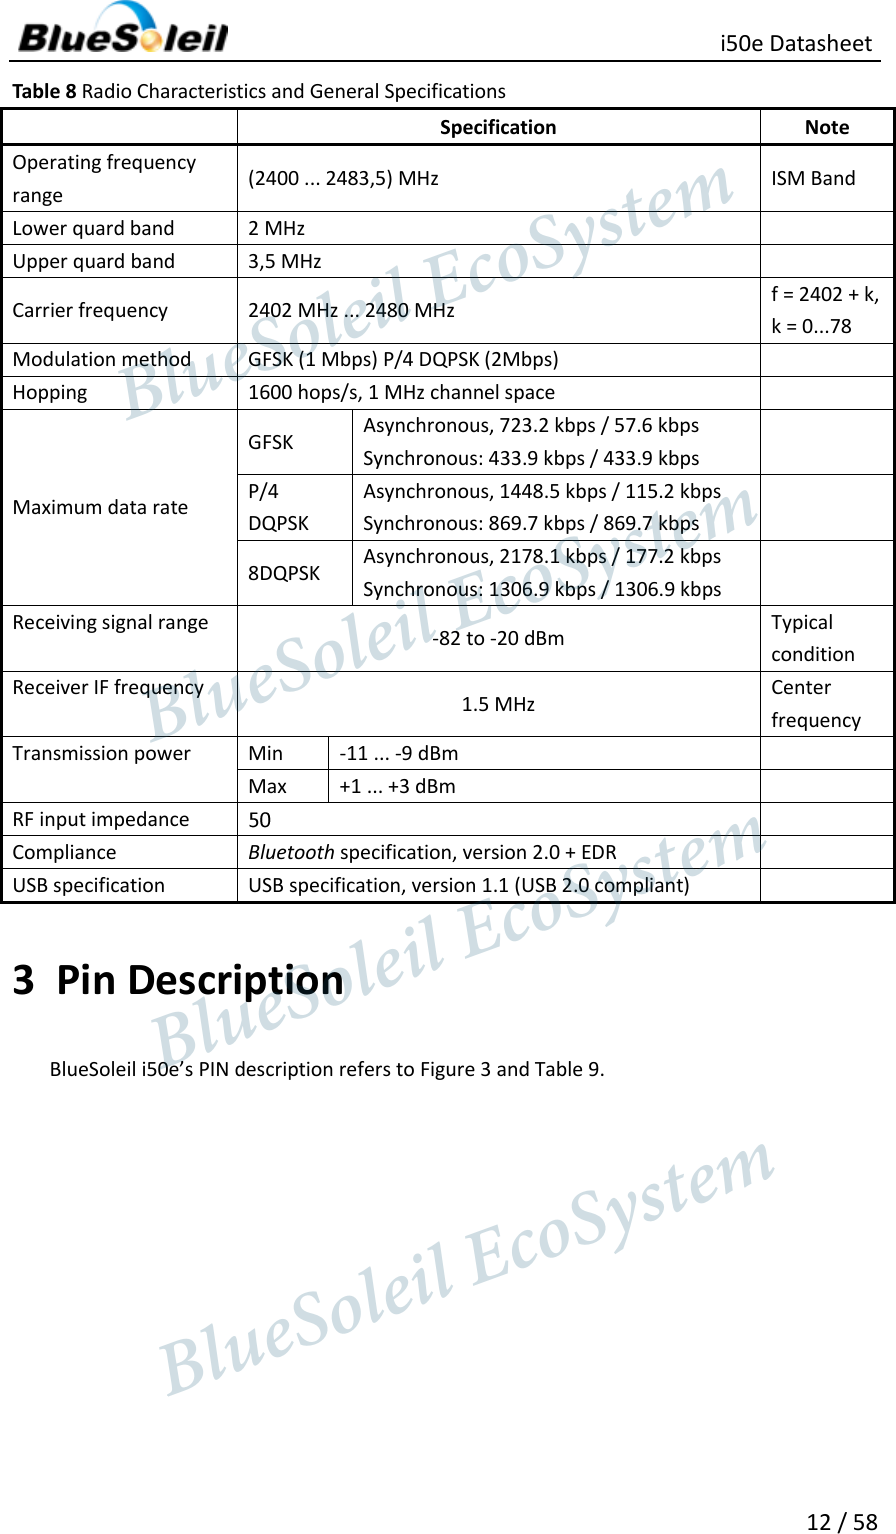                                                   i50e Datasheet 12 / 58 Table 8 Radio Characteristics and General Specifications  Specification Note Operating frequency range   (2400 ... 2483,5) MHz   ISM Band   Lower quard band   2 MHz    Upper quard band   3,5 MHz    Carrier frequency   2402 MHz ... 2480 MHz   f = 2402 + k, k = 0...78   Modulation method   GFSK (1 Mbps) P/4 DQPSK (2Mbps)    Hopping   1600 hops/s, 1 MHz channel space    Maximum data rate   GFSK   Asynchronous, 723.2 kbps / 57.6 kbps Synchronous: 433.9 kbps / 433.9 kbps    P/4 DQPSK Asynchronous, 1448.5 kbps / 115.2 kbps Synchronous: 869.7 kbps / 869.7 kbps    8DQPSK Asynchronous, 2178.1 kbps / 177.2 kbps Synchronous: 1306.9 kbps / 1306.9 kbps    Receiving signal range   -82 to -20 dBm Typical condition   Receiver IF frequency   1.5 MHz   Center frequency   Transmission power   Min   -11 ... -9 dBm  Max   +1 ... +3 dBm  RF input impedance     Compliance   Bluetooth specification, version 2.0 + EDR    USB specification   USB specification, version 1.1 (USB 2.0 compliant)    3 Pin Description BlueSoleil i50e’s PIN description refers to Figure 3 and Table 9.                  BlueSoleil EcoSystem            BlueSoleil EcoSystem      BlueSoleil EcoSystemBlueSoleil EcoSystem